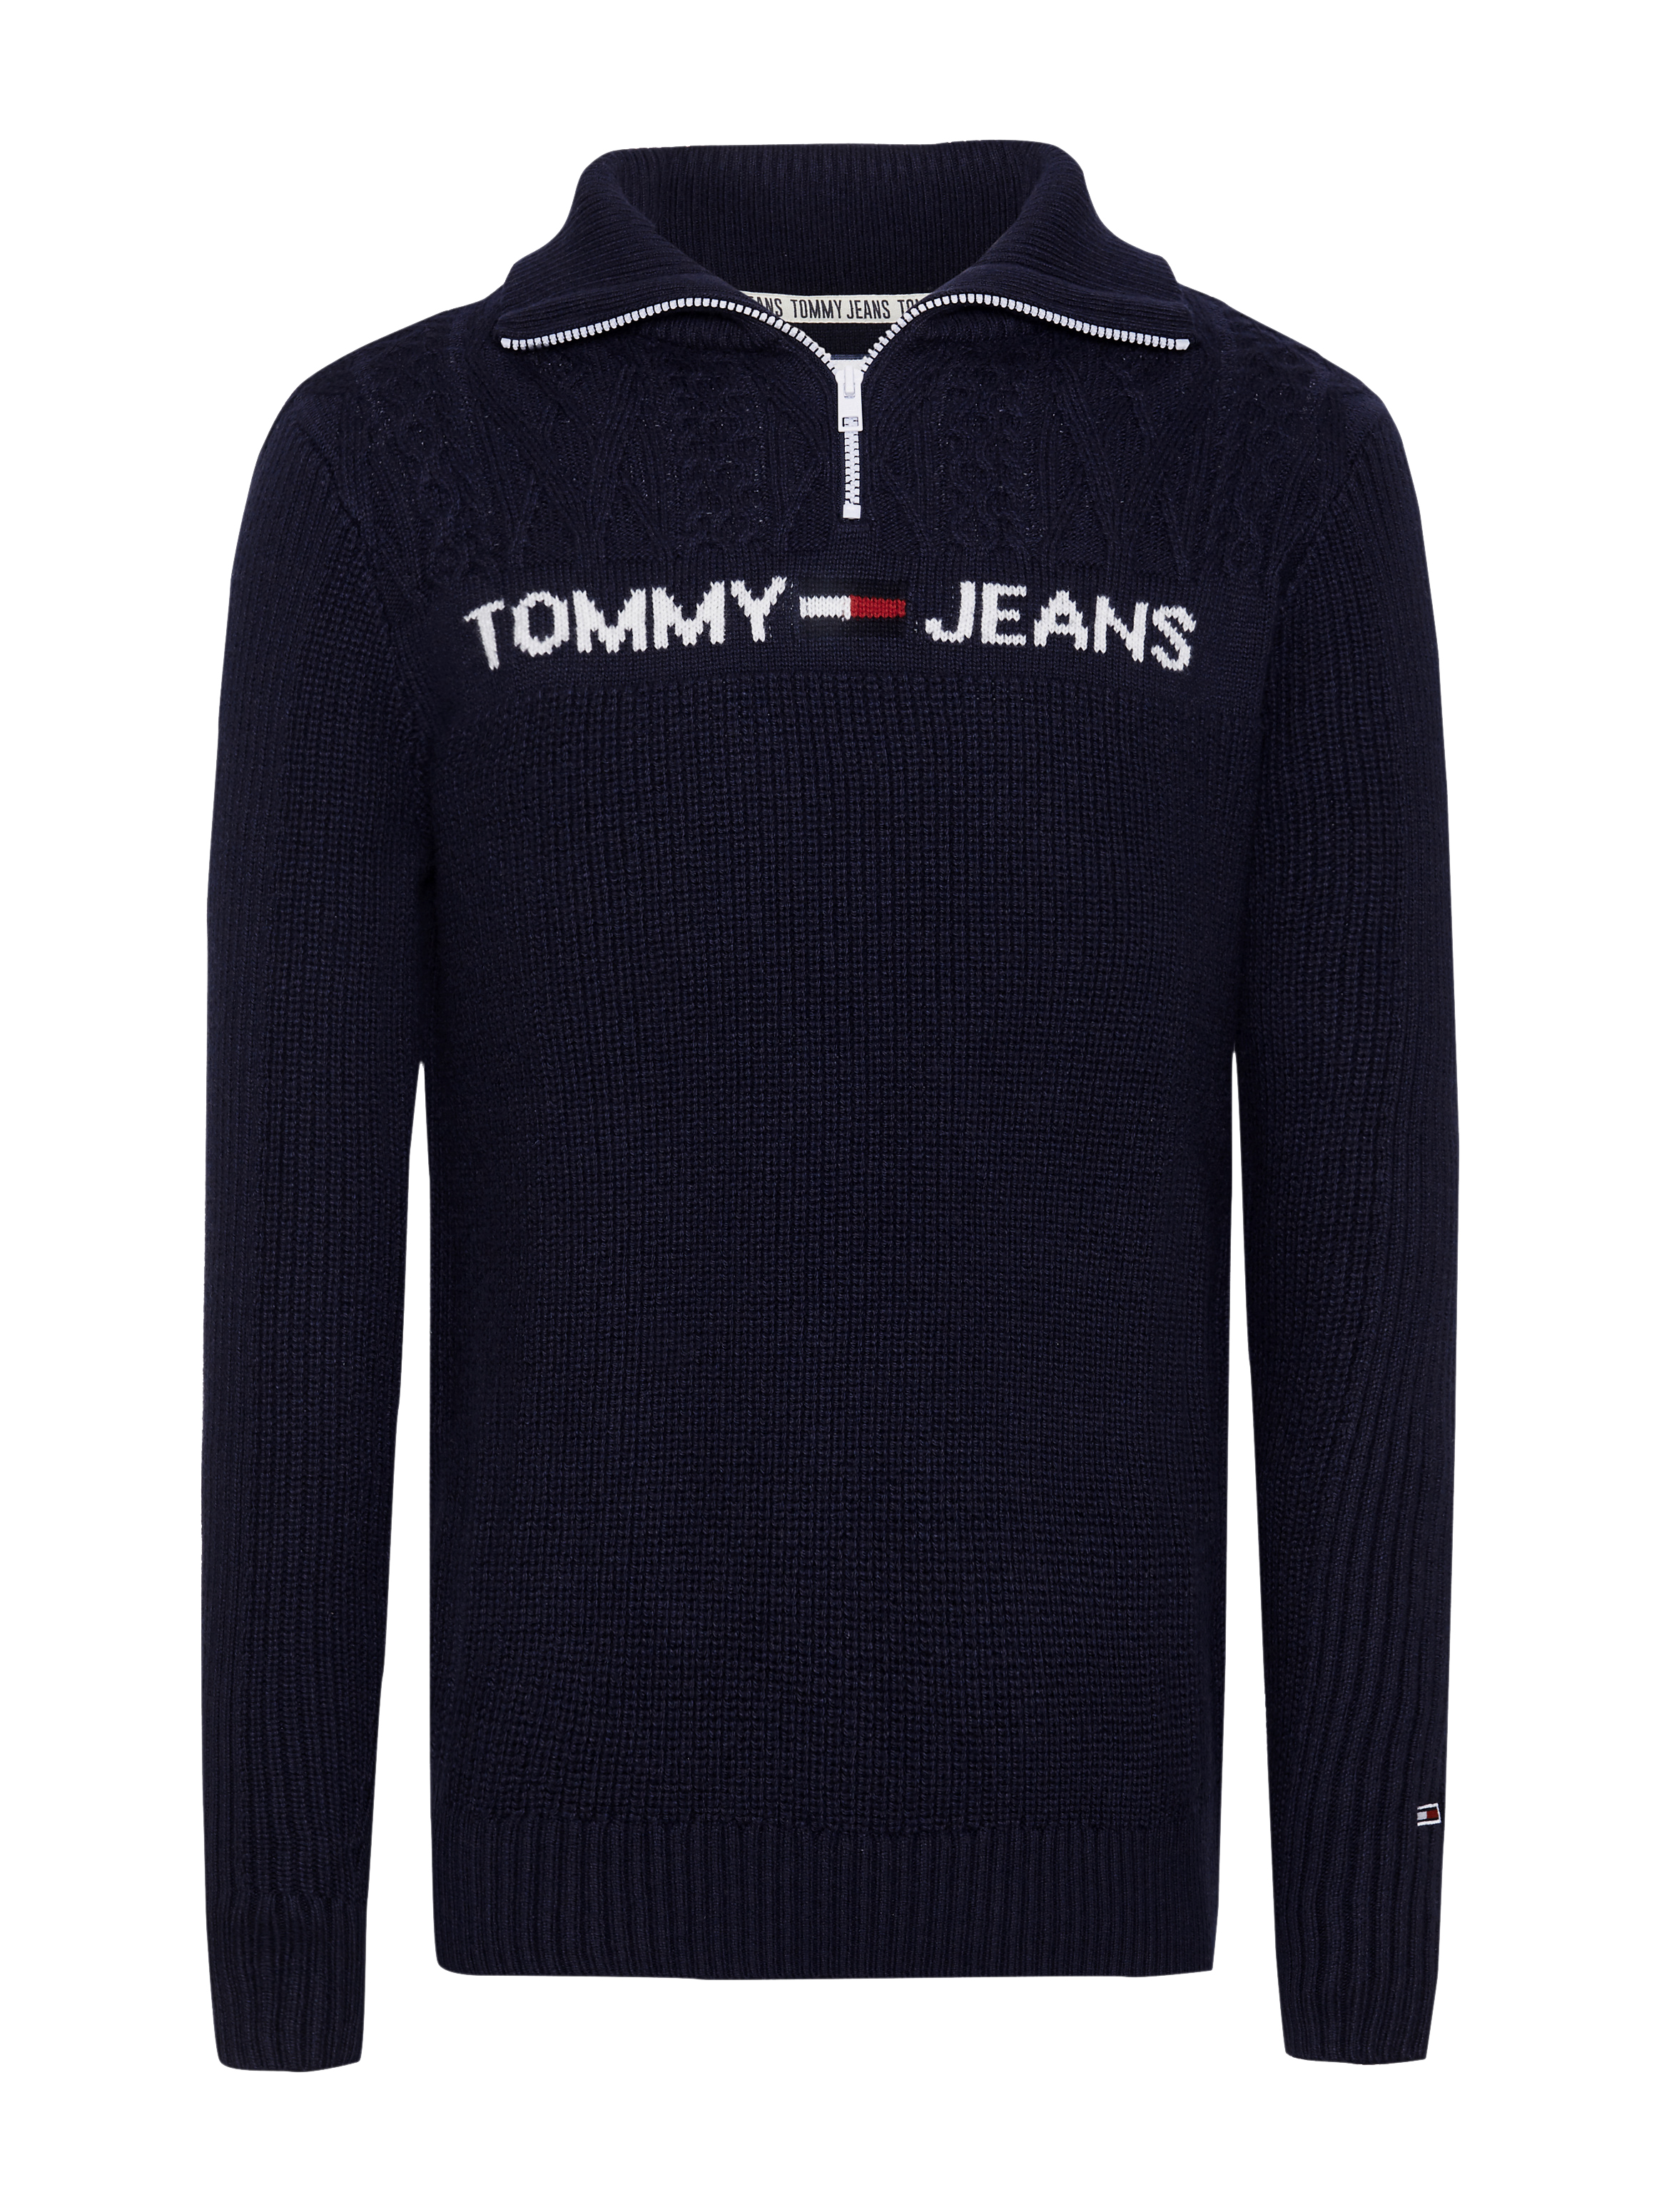 JERSEY HOMBRE TH TJM TEXTURED MOCK SWEATER